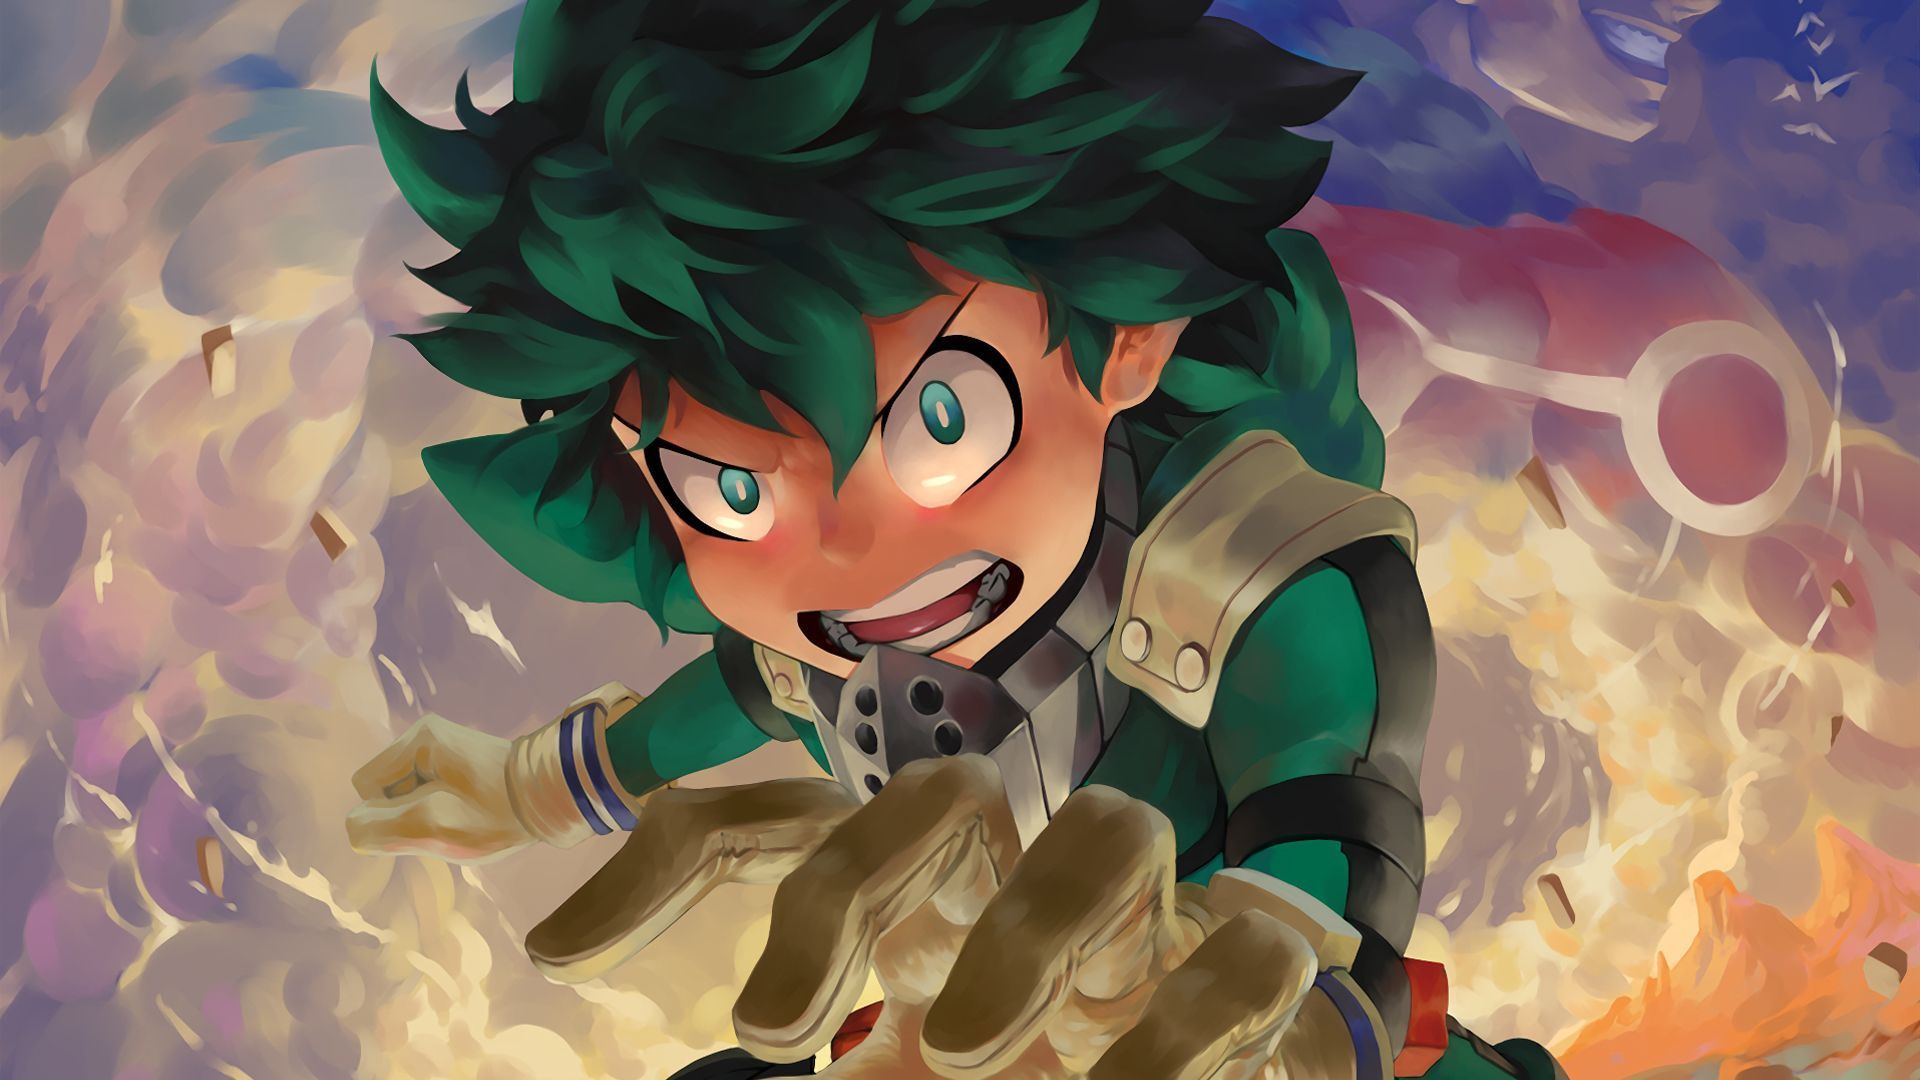 A cartoon character with green hair and hands - My Hero Academia